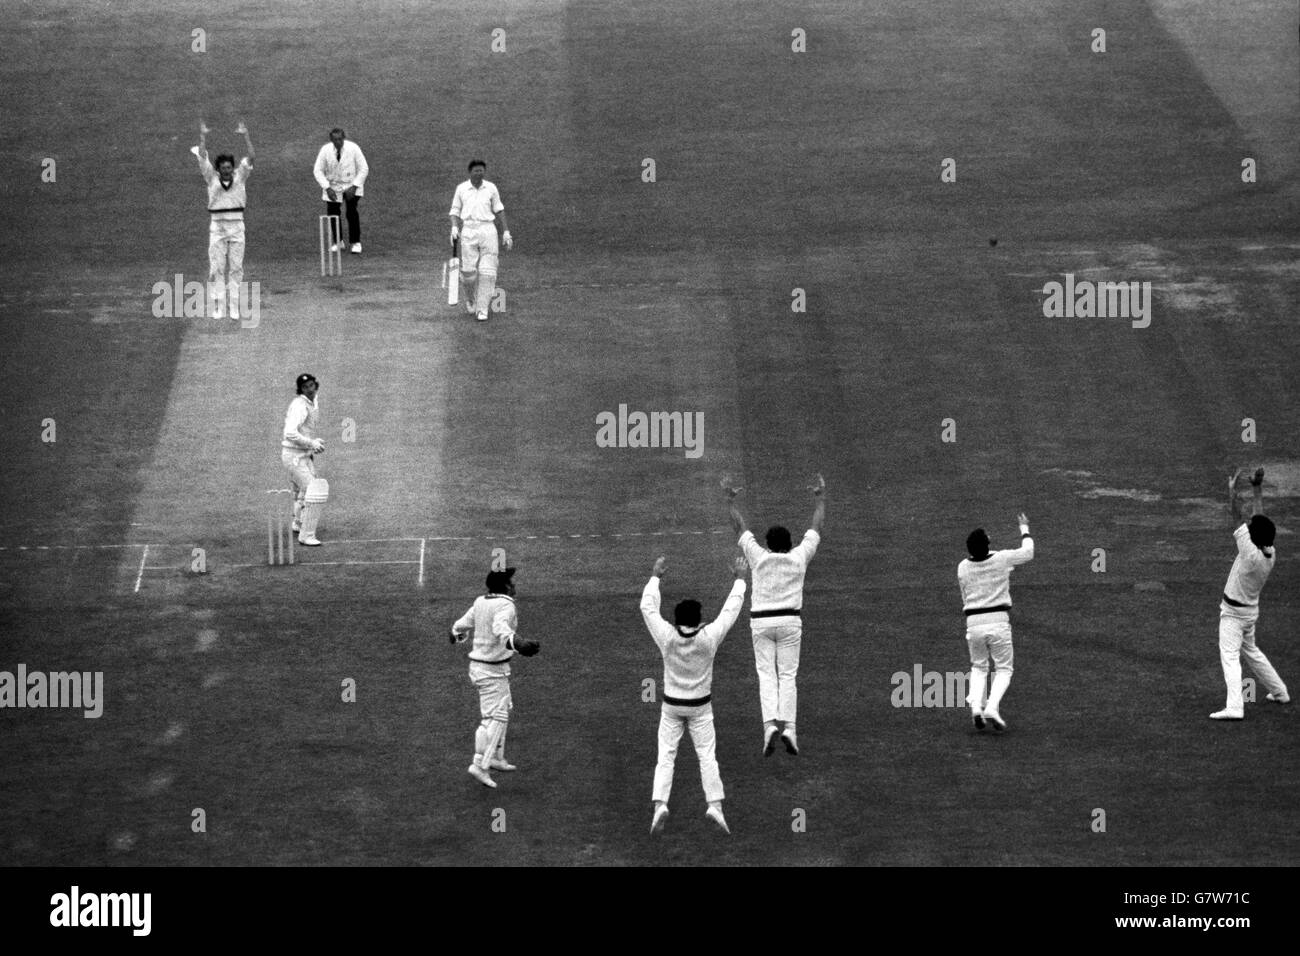 Alan Knott (batsman nearer camera) out for 12, caught by Greg Chappell off a ball from Bob Massie (top left), in England's disastrous second innings at Lord's. With Knott's wicket, his fourth in the innings, Massie had equalled the record of wickets taken in a Test debut, with 12 for 107. Stock Photo